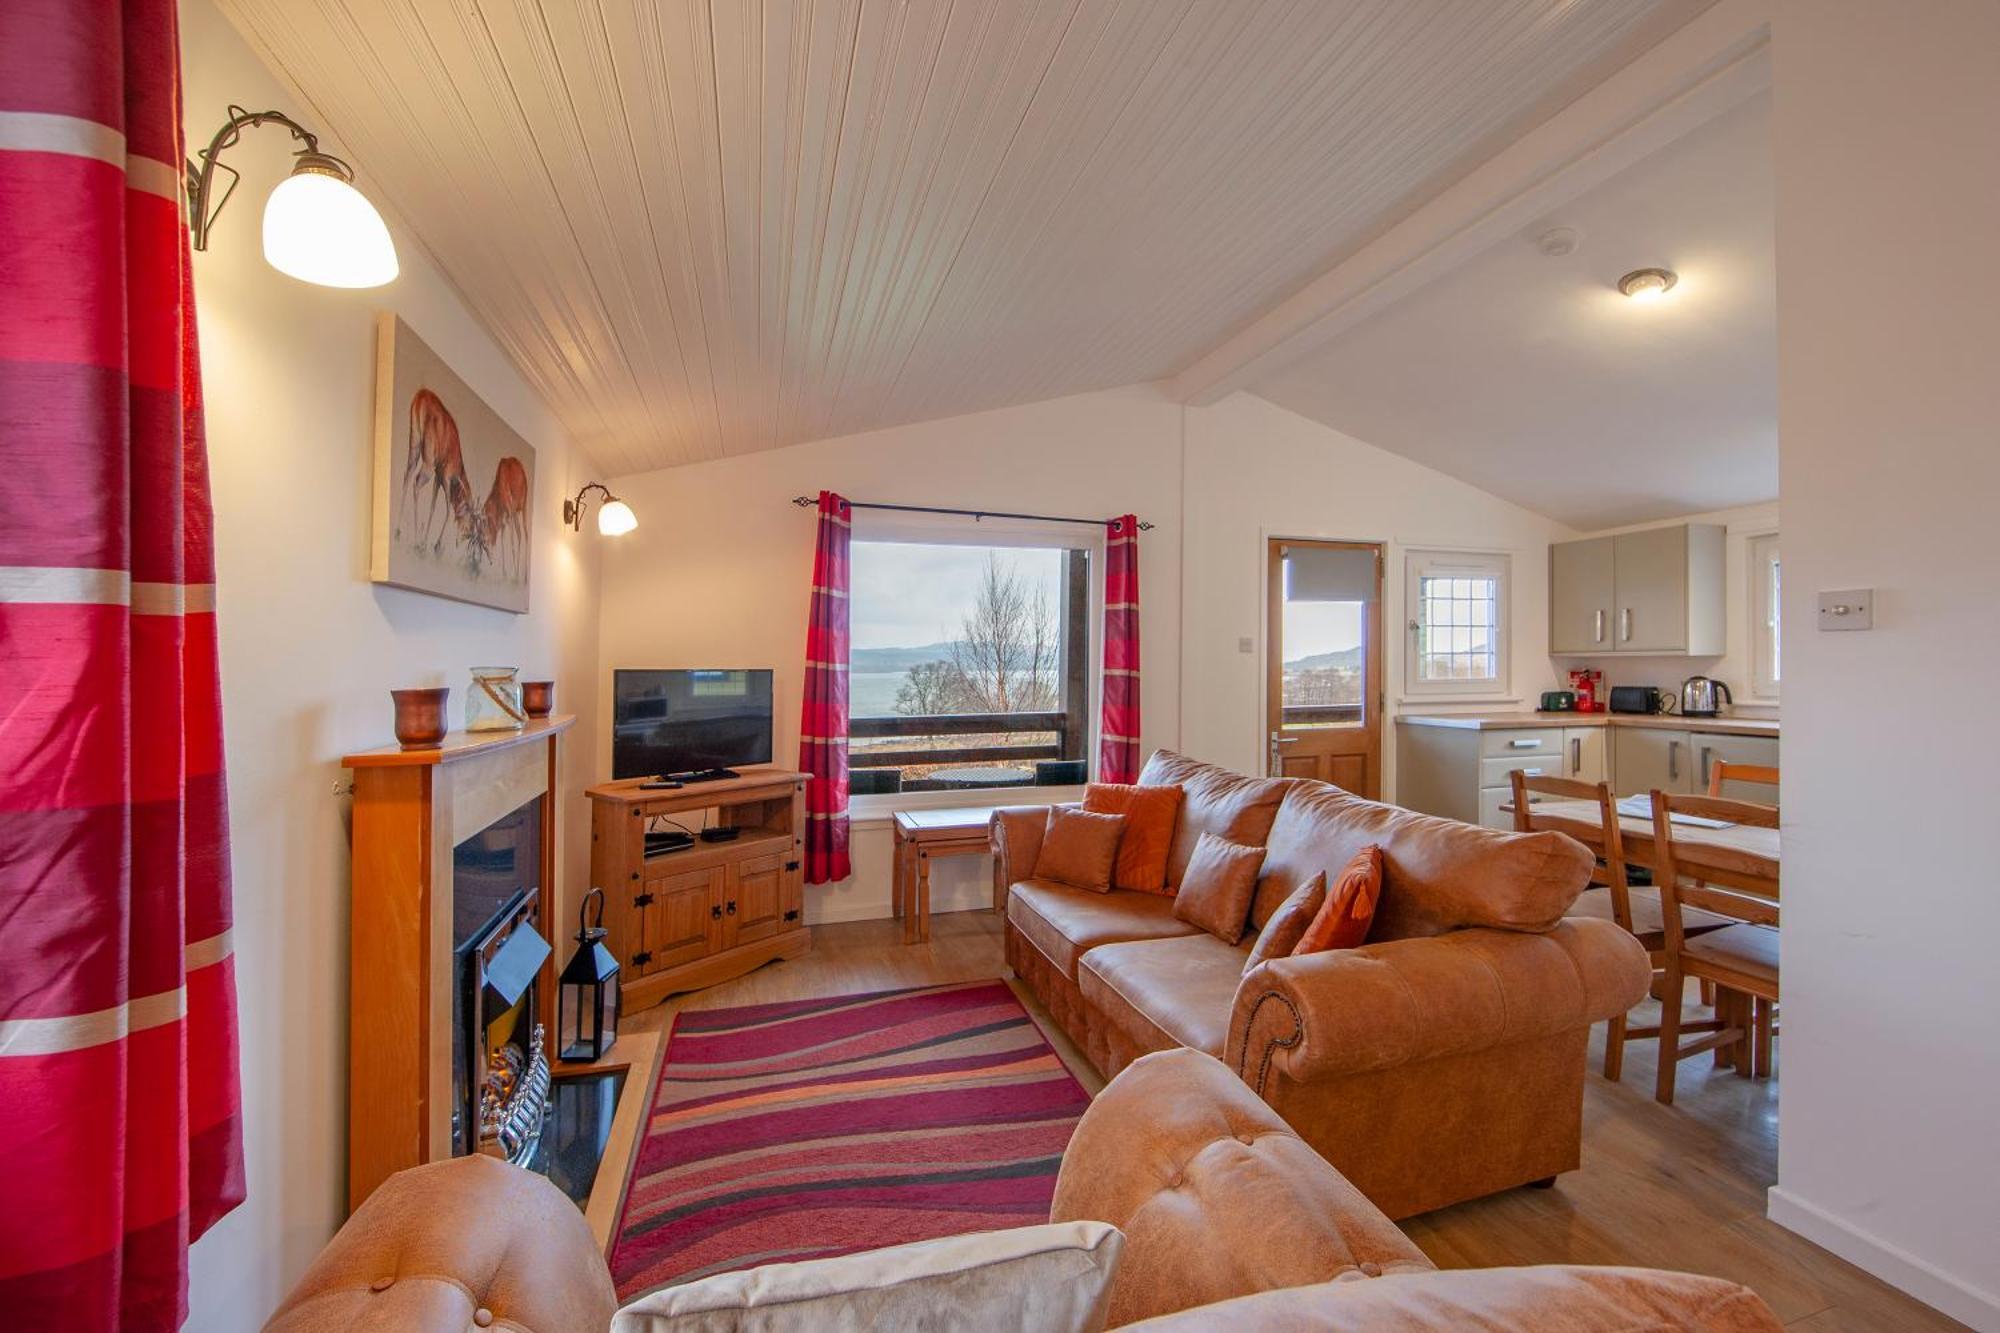 Appin Holiday Homes -Caravans, Lodges, Shepherds Hut And Train Carriage Stays 外观 照片